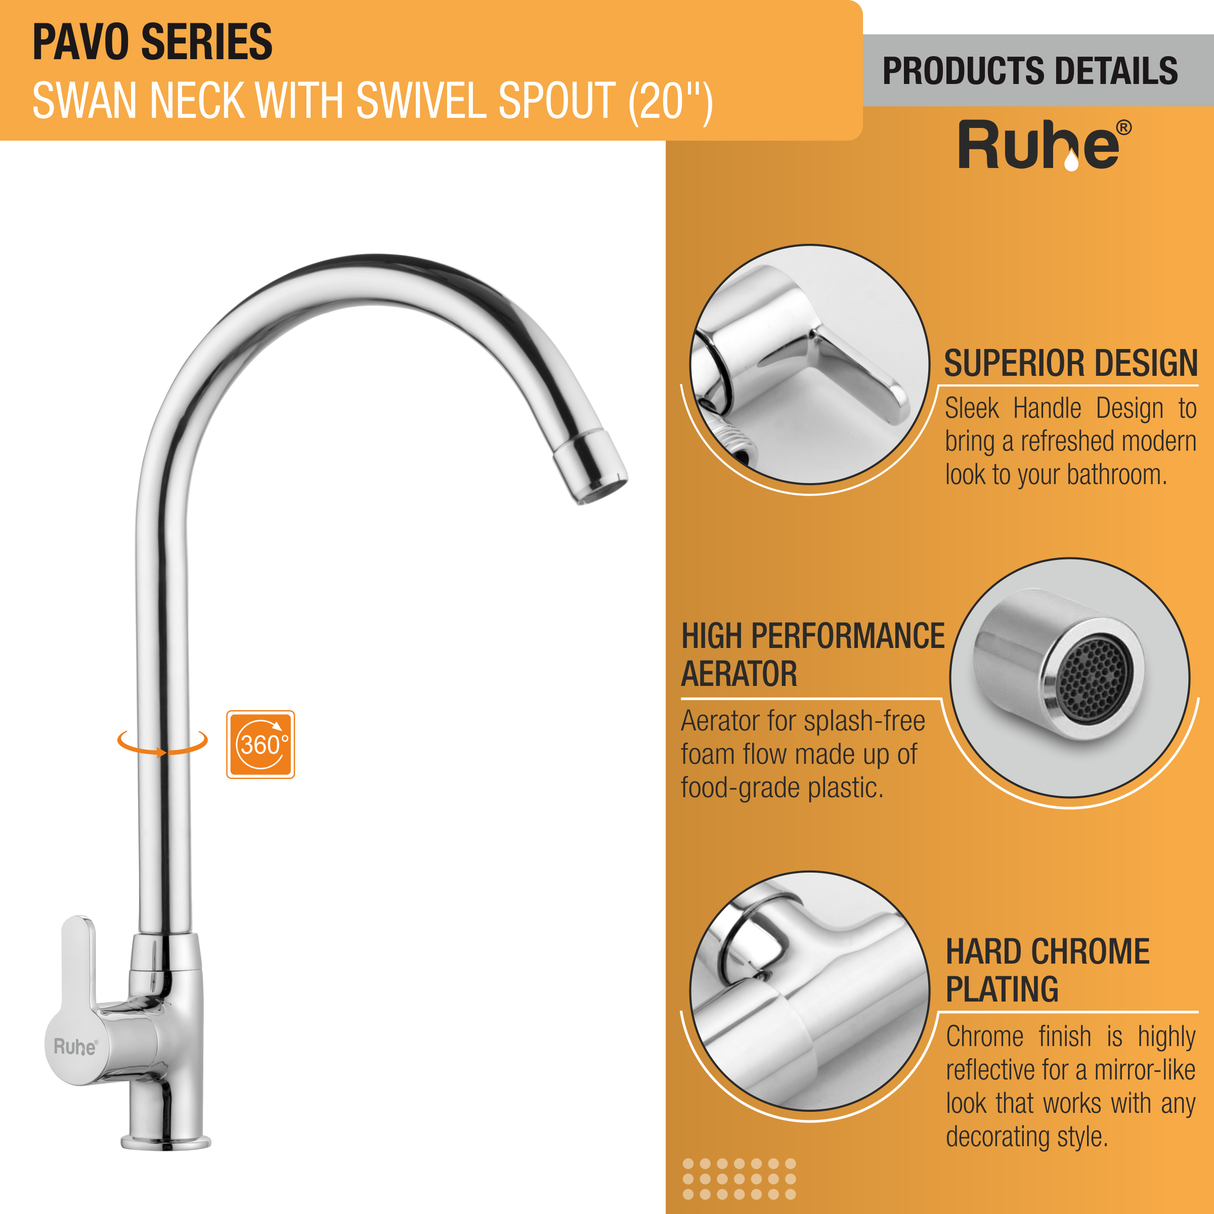 Pavo Swan Neck with Large (20 inches) Round Swivel Spout Faucet details